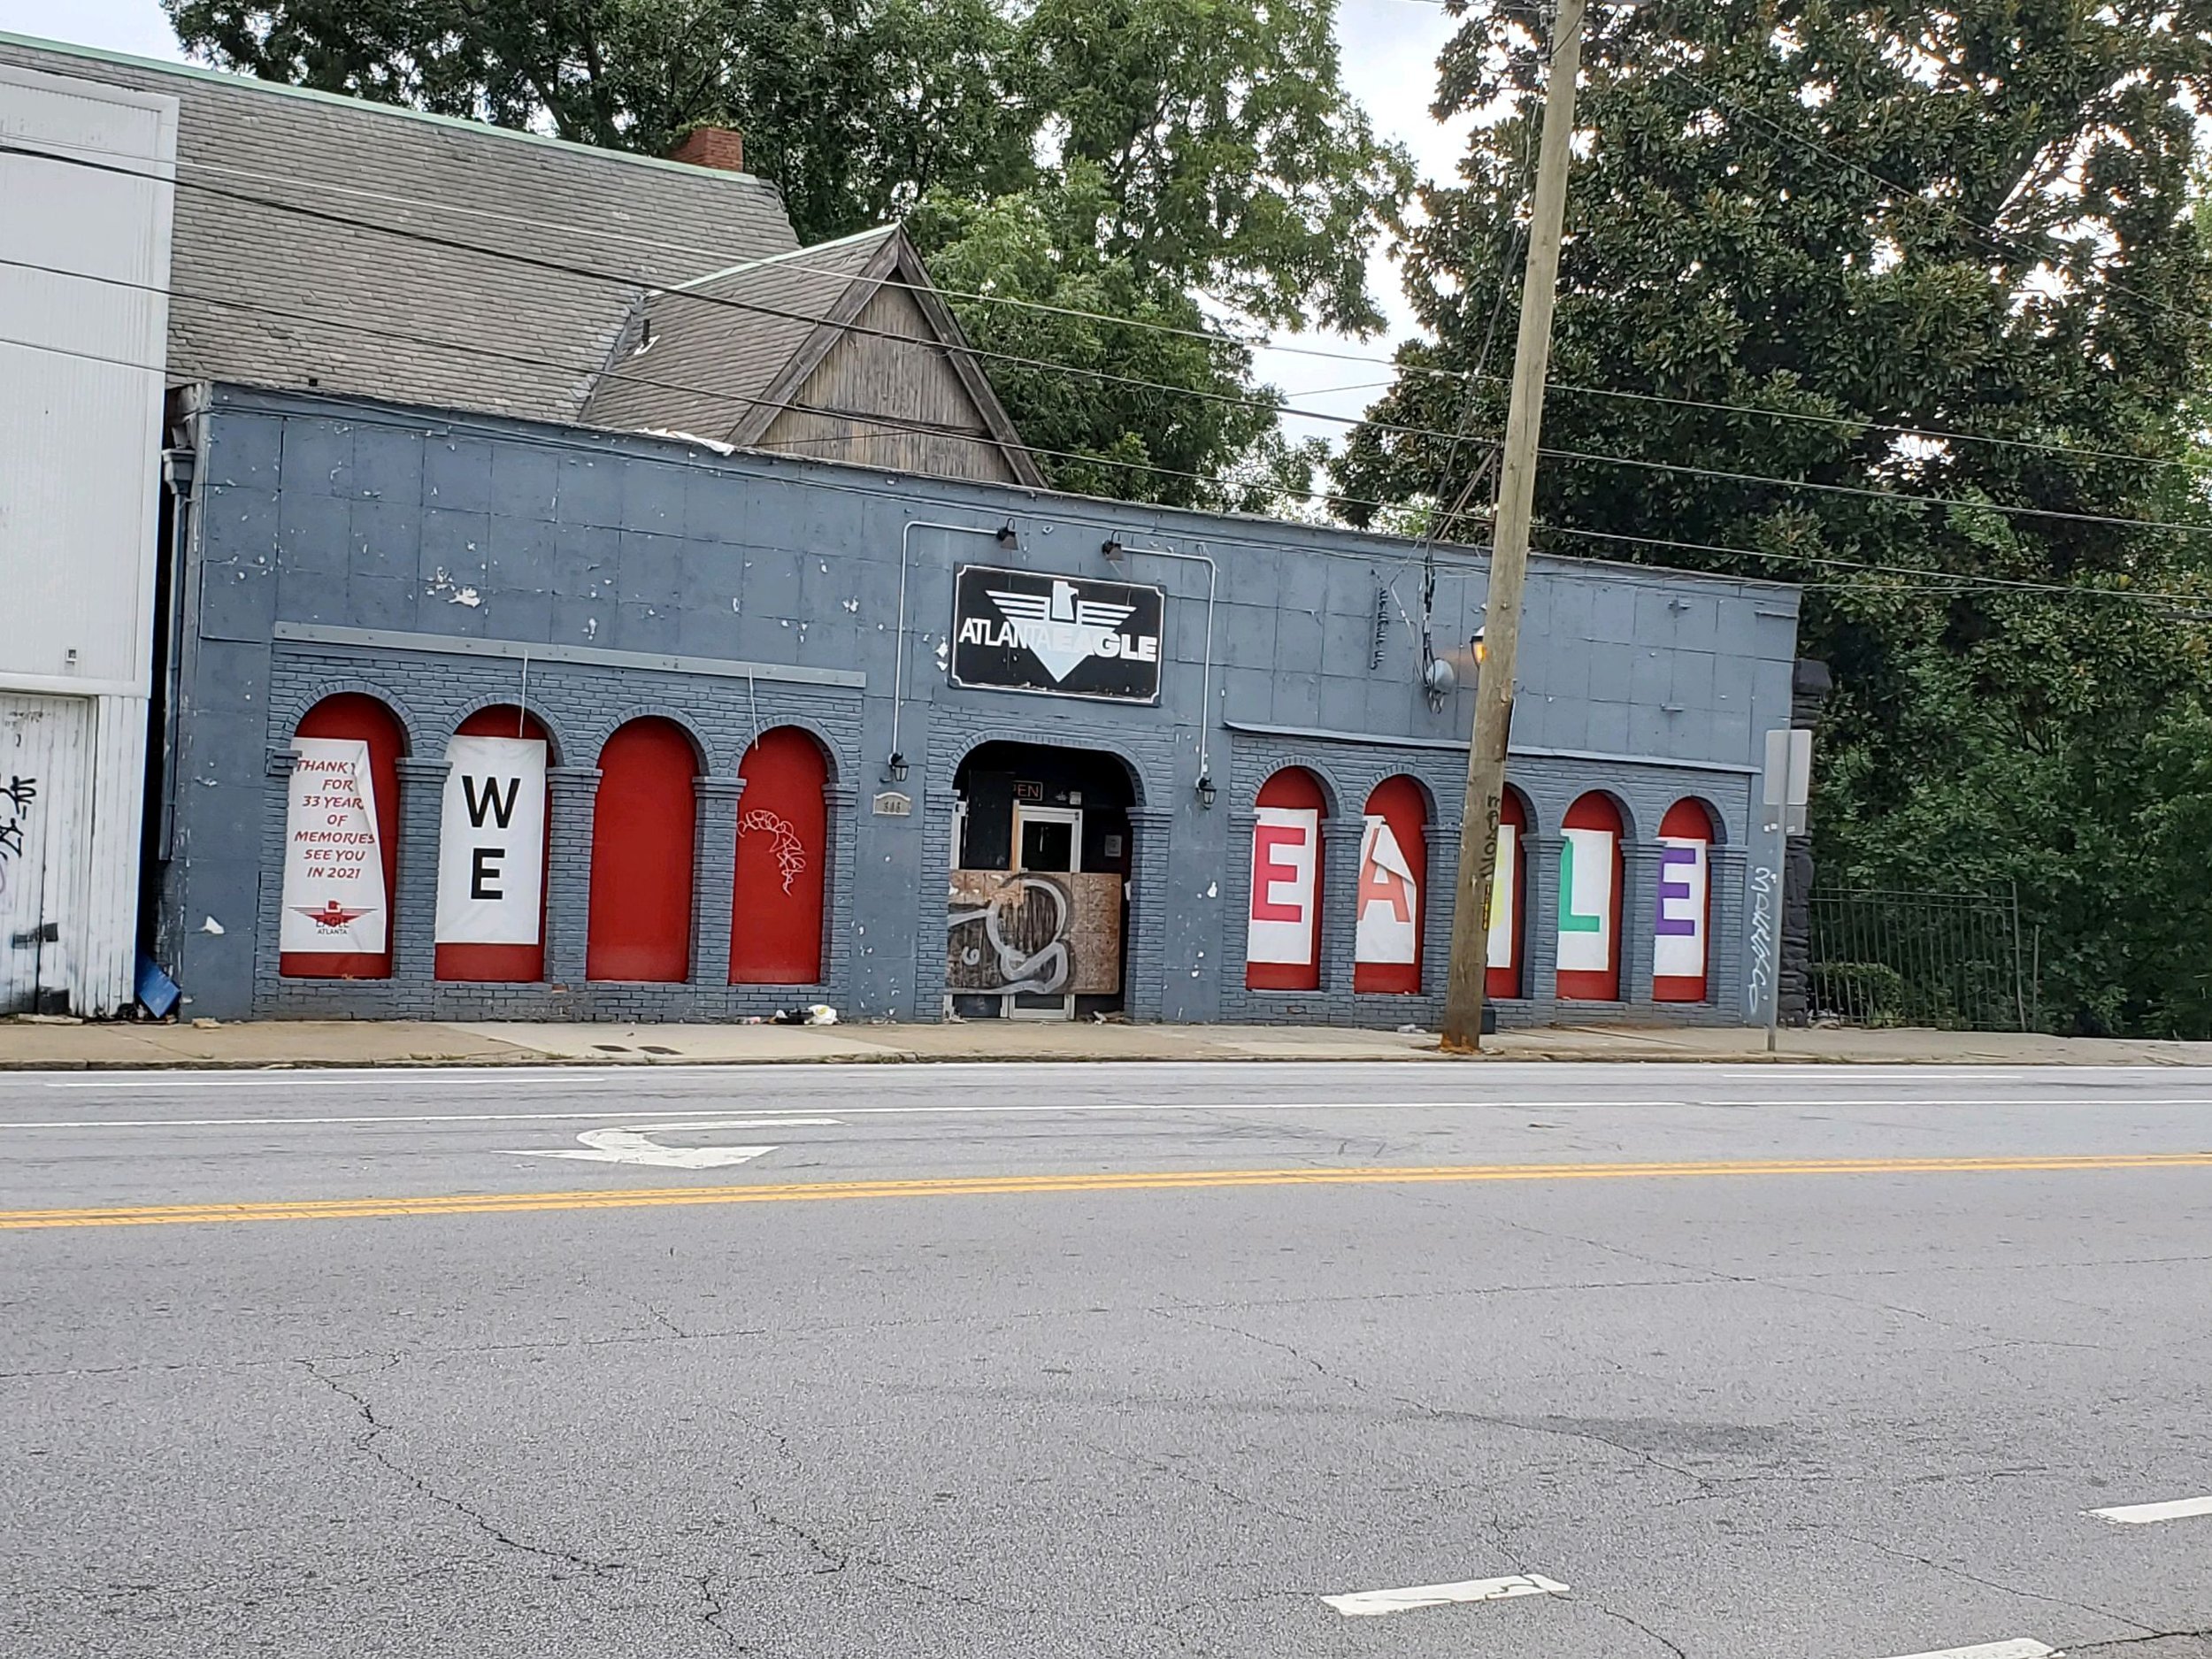  Longstanding gay club, Atlanta Eagle on Ponce de Leon Ave, closed its doors in 2020. 